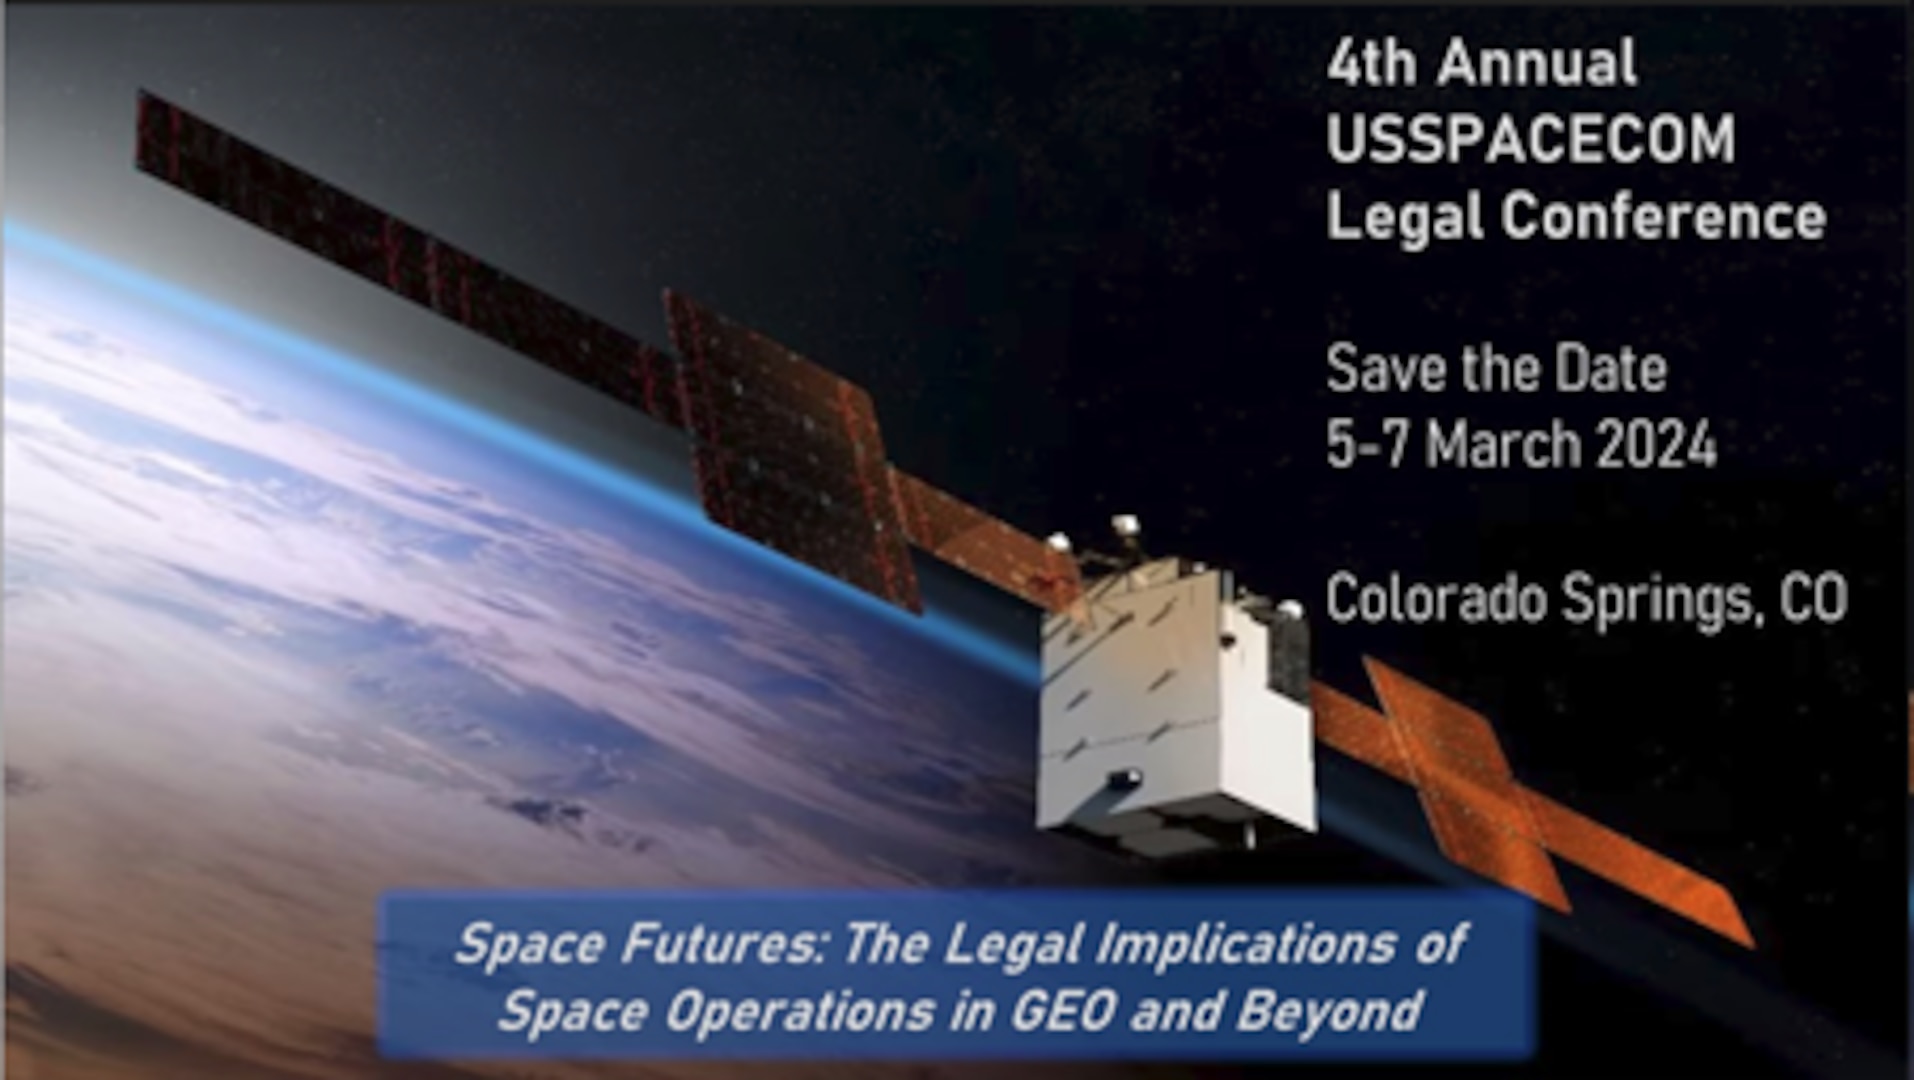 USSPACECOM to Host Fourth Annual Legal Conference